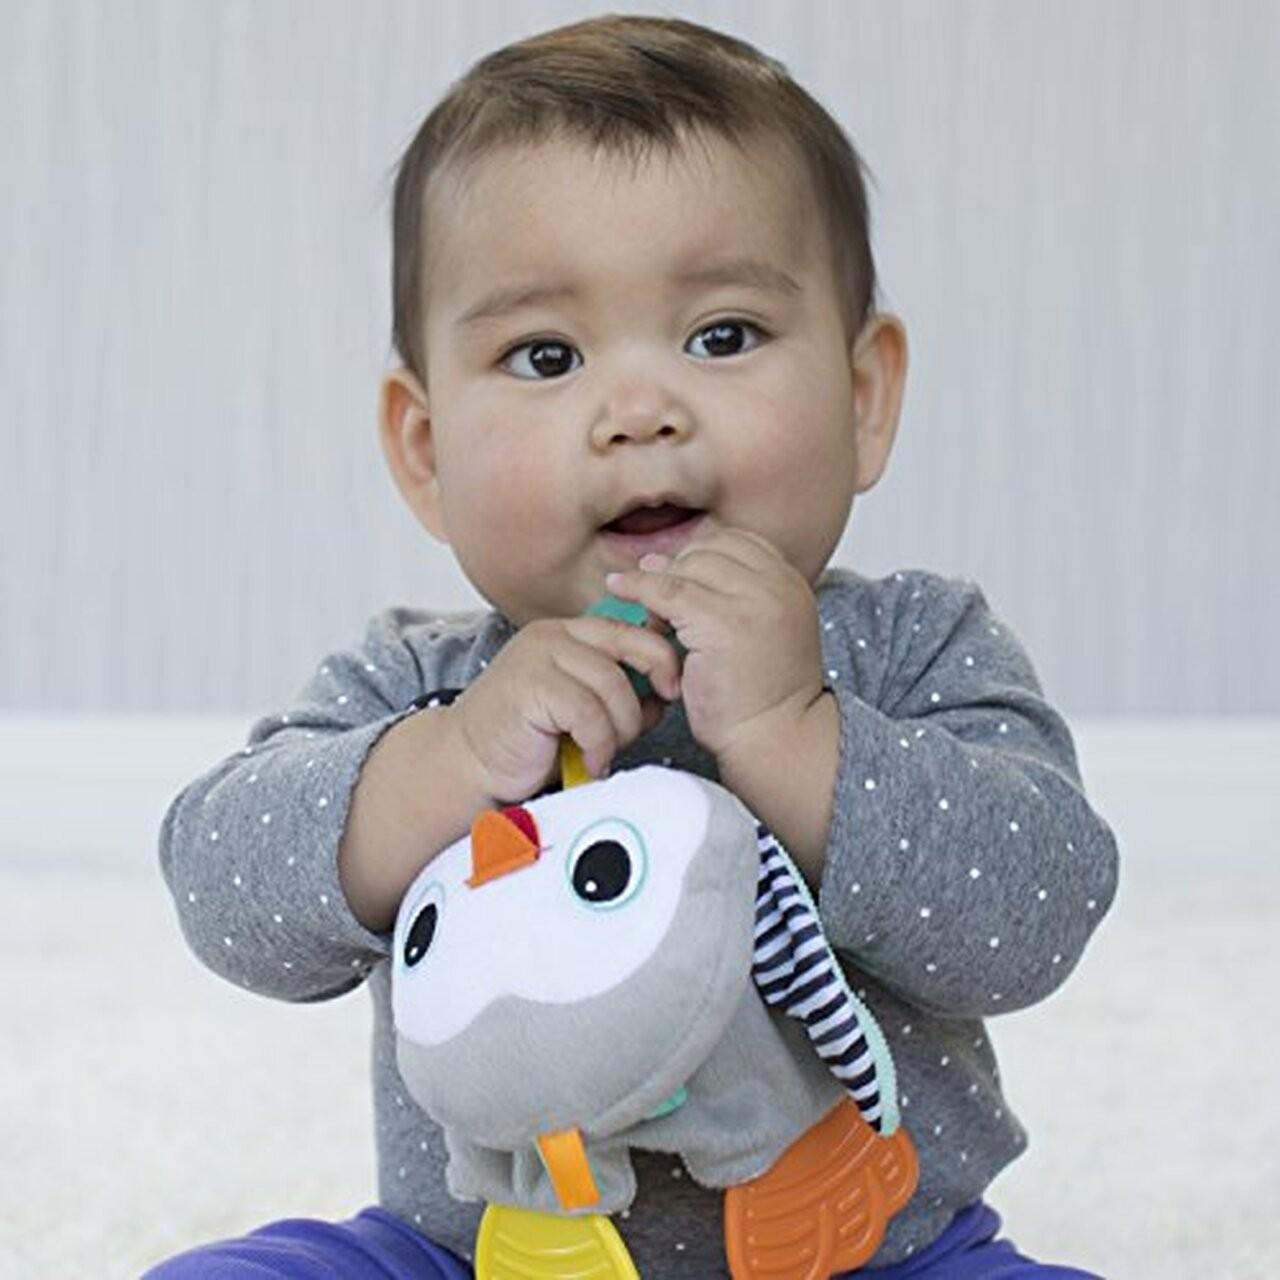 Infantino - Main - Cuddly Teether Penguin